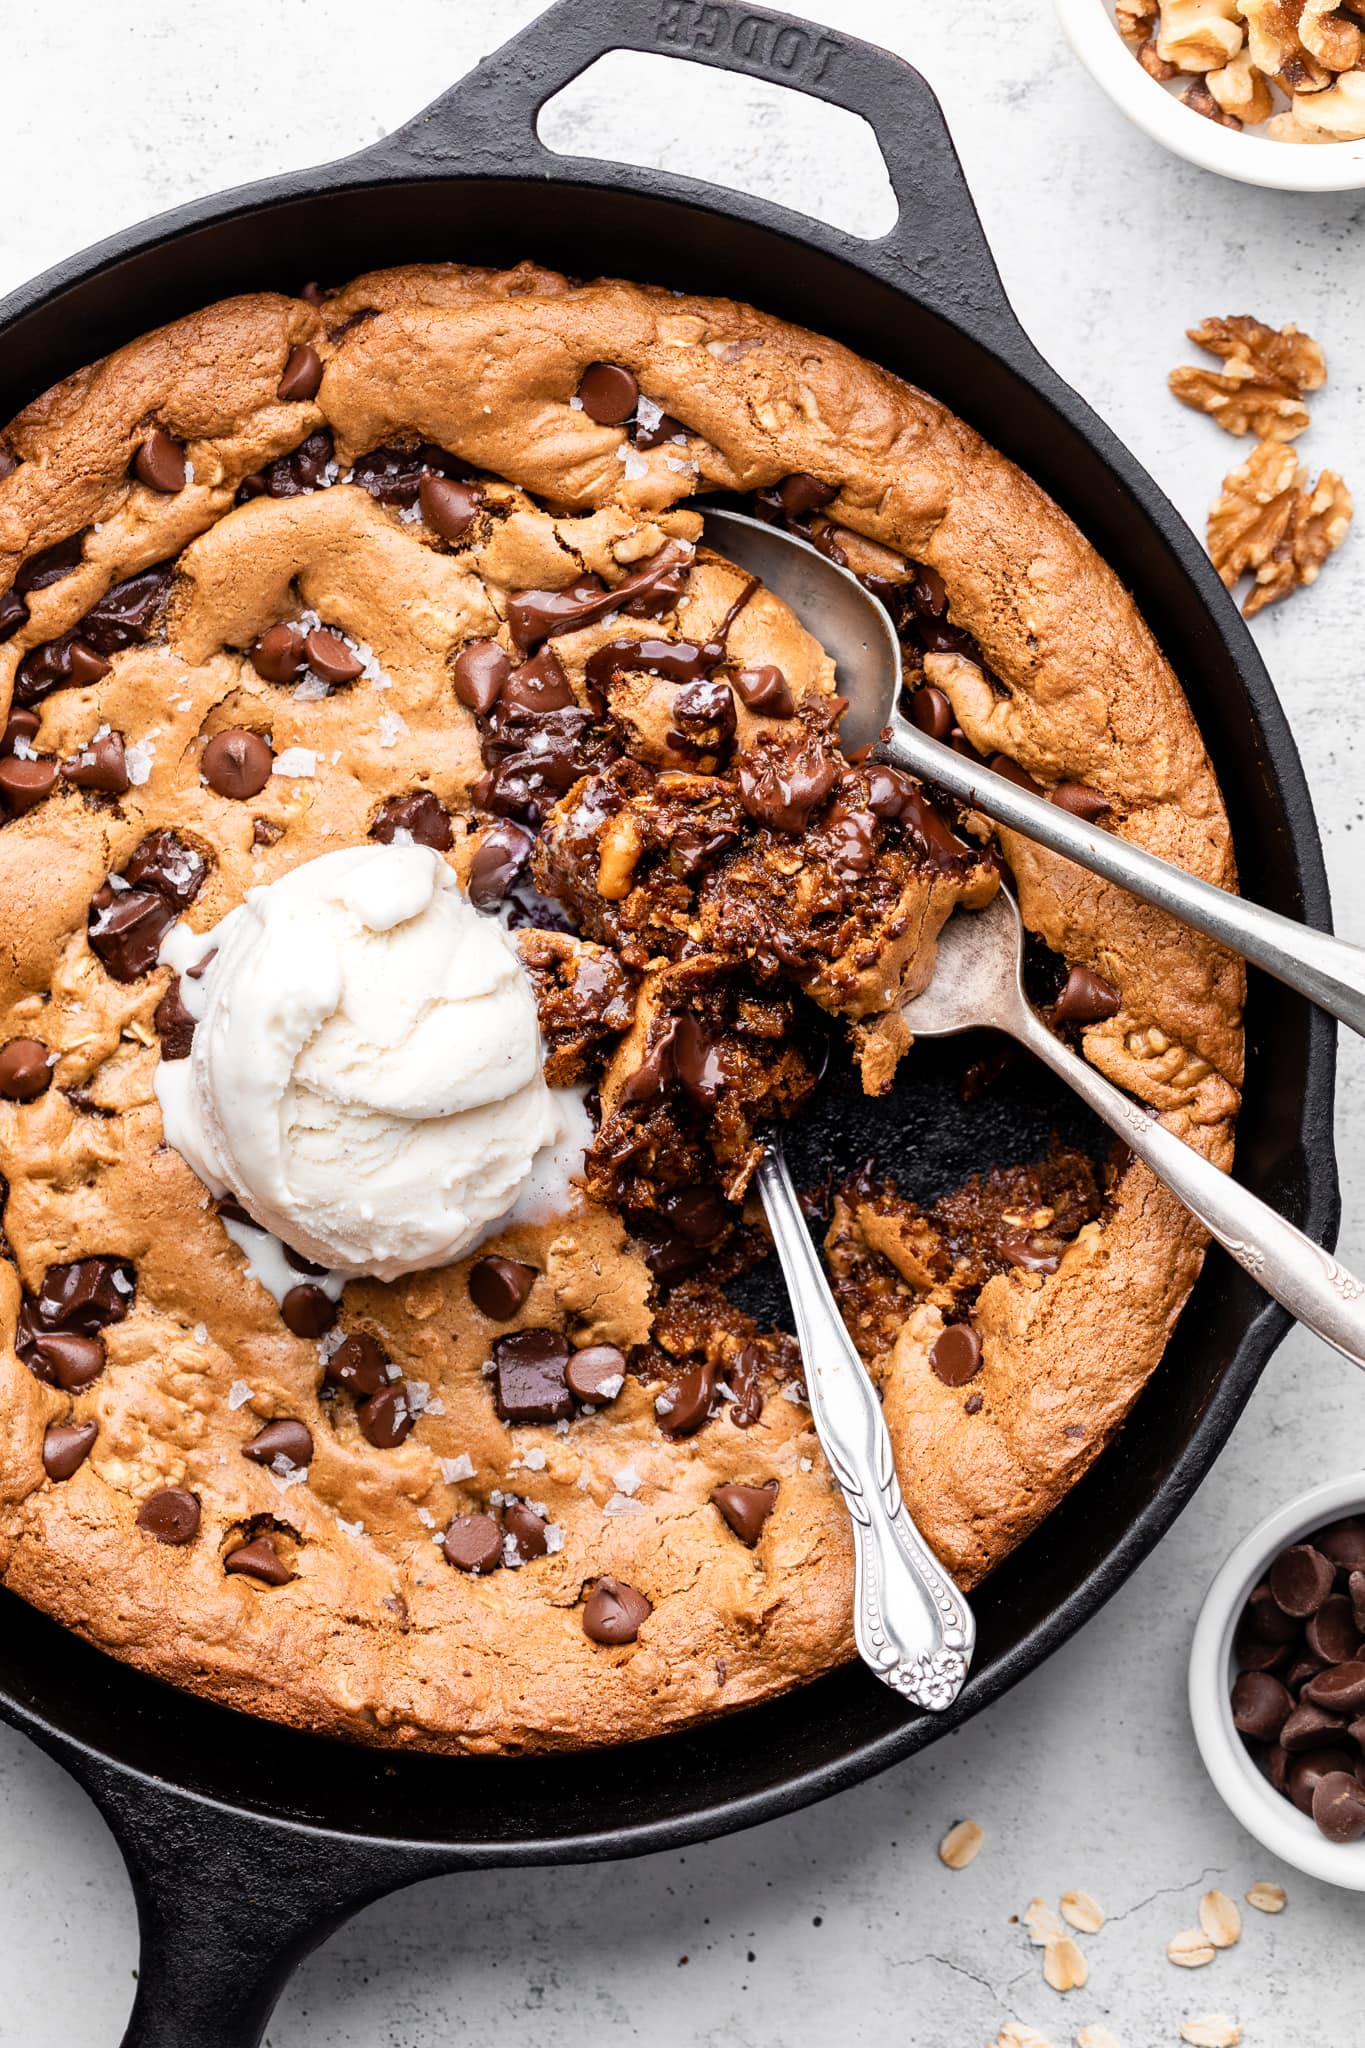 https://allthehealthythings.com/wp-content/uploads/2021/11/oatmeal-chocolate-chip-cookie-skillet-6.jpg